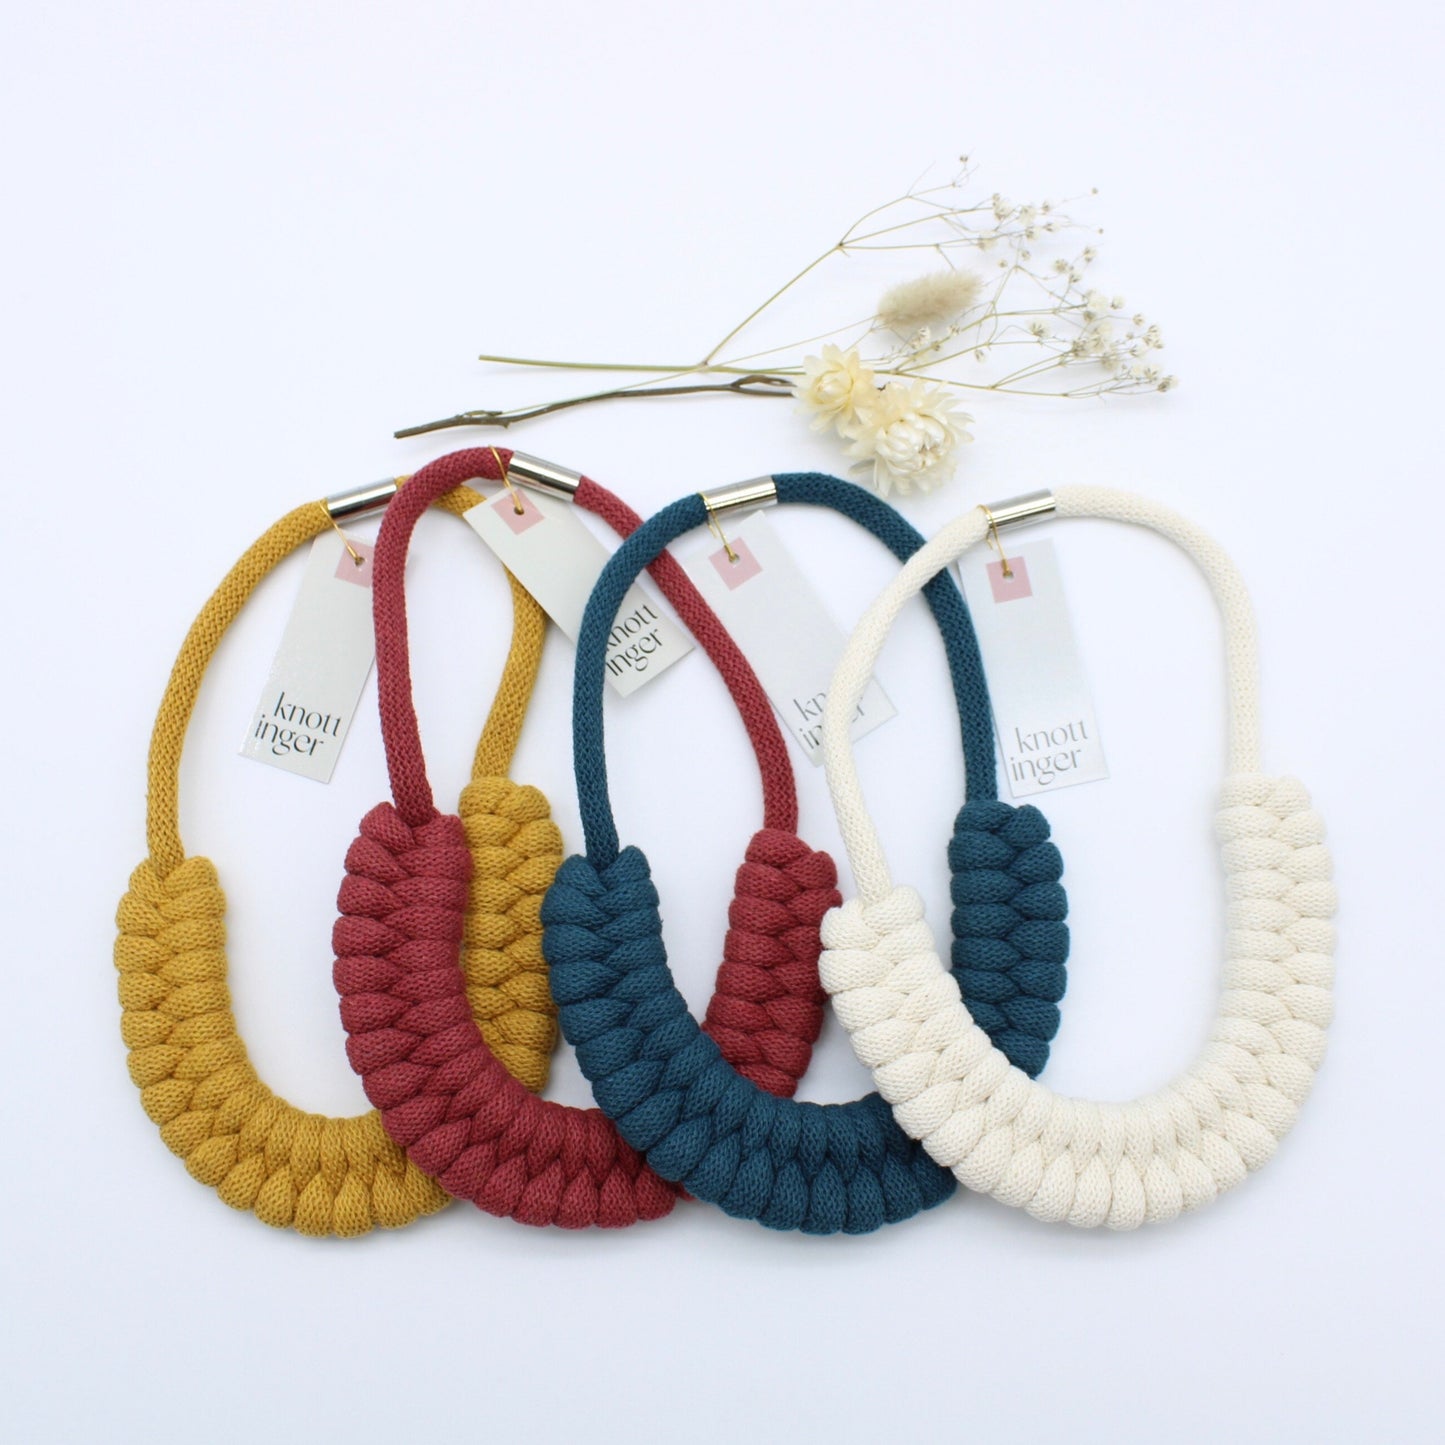 Knotted Rope Necklace